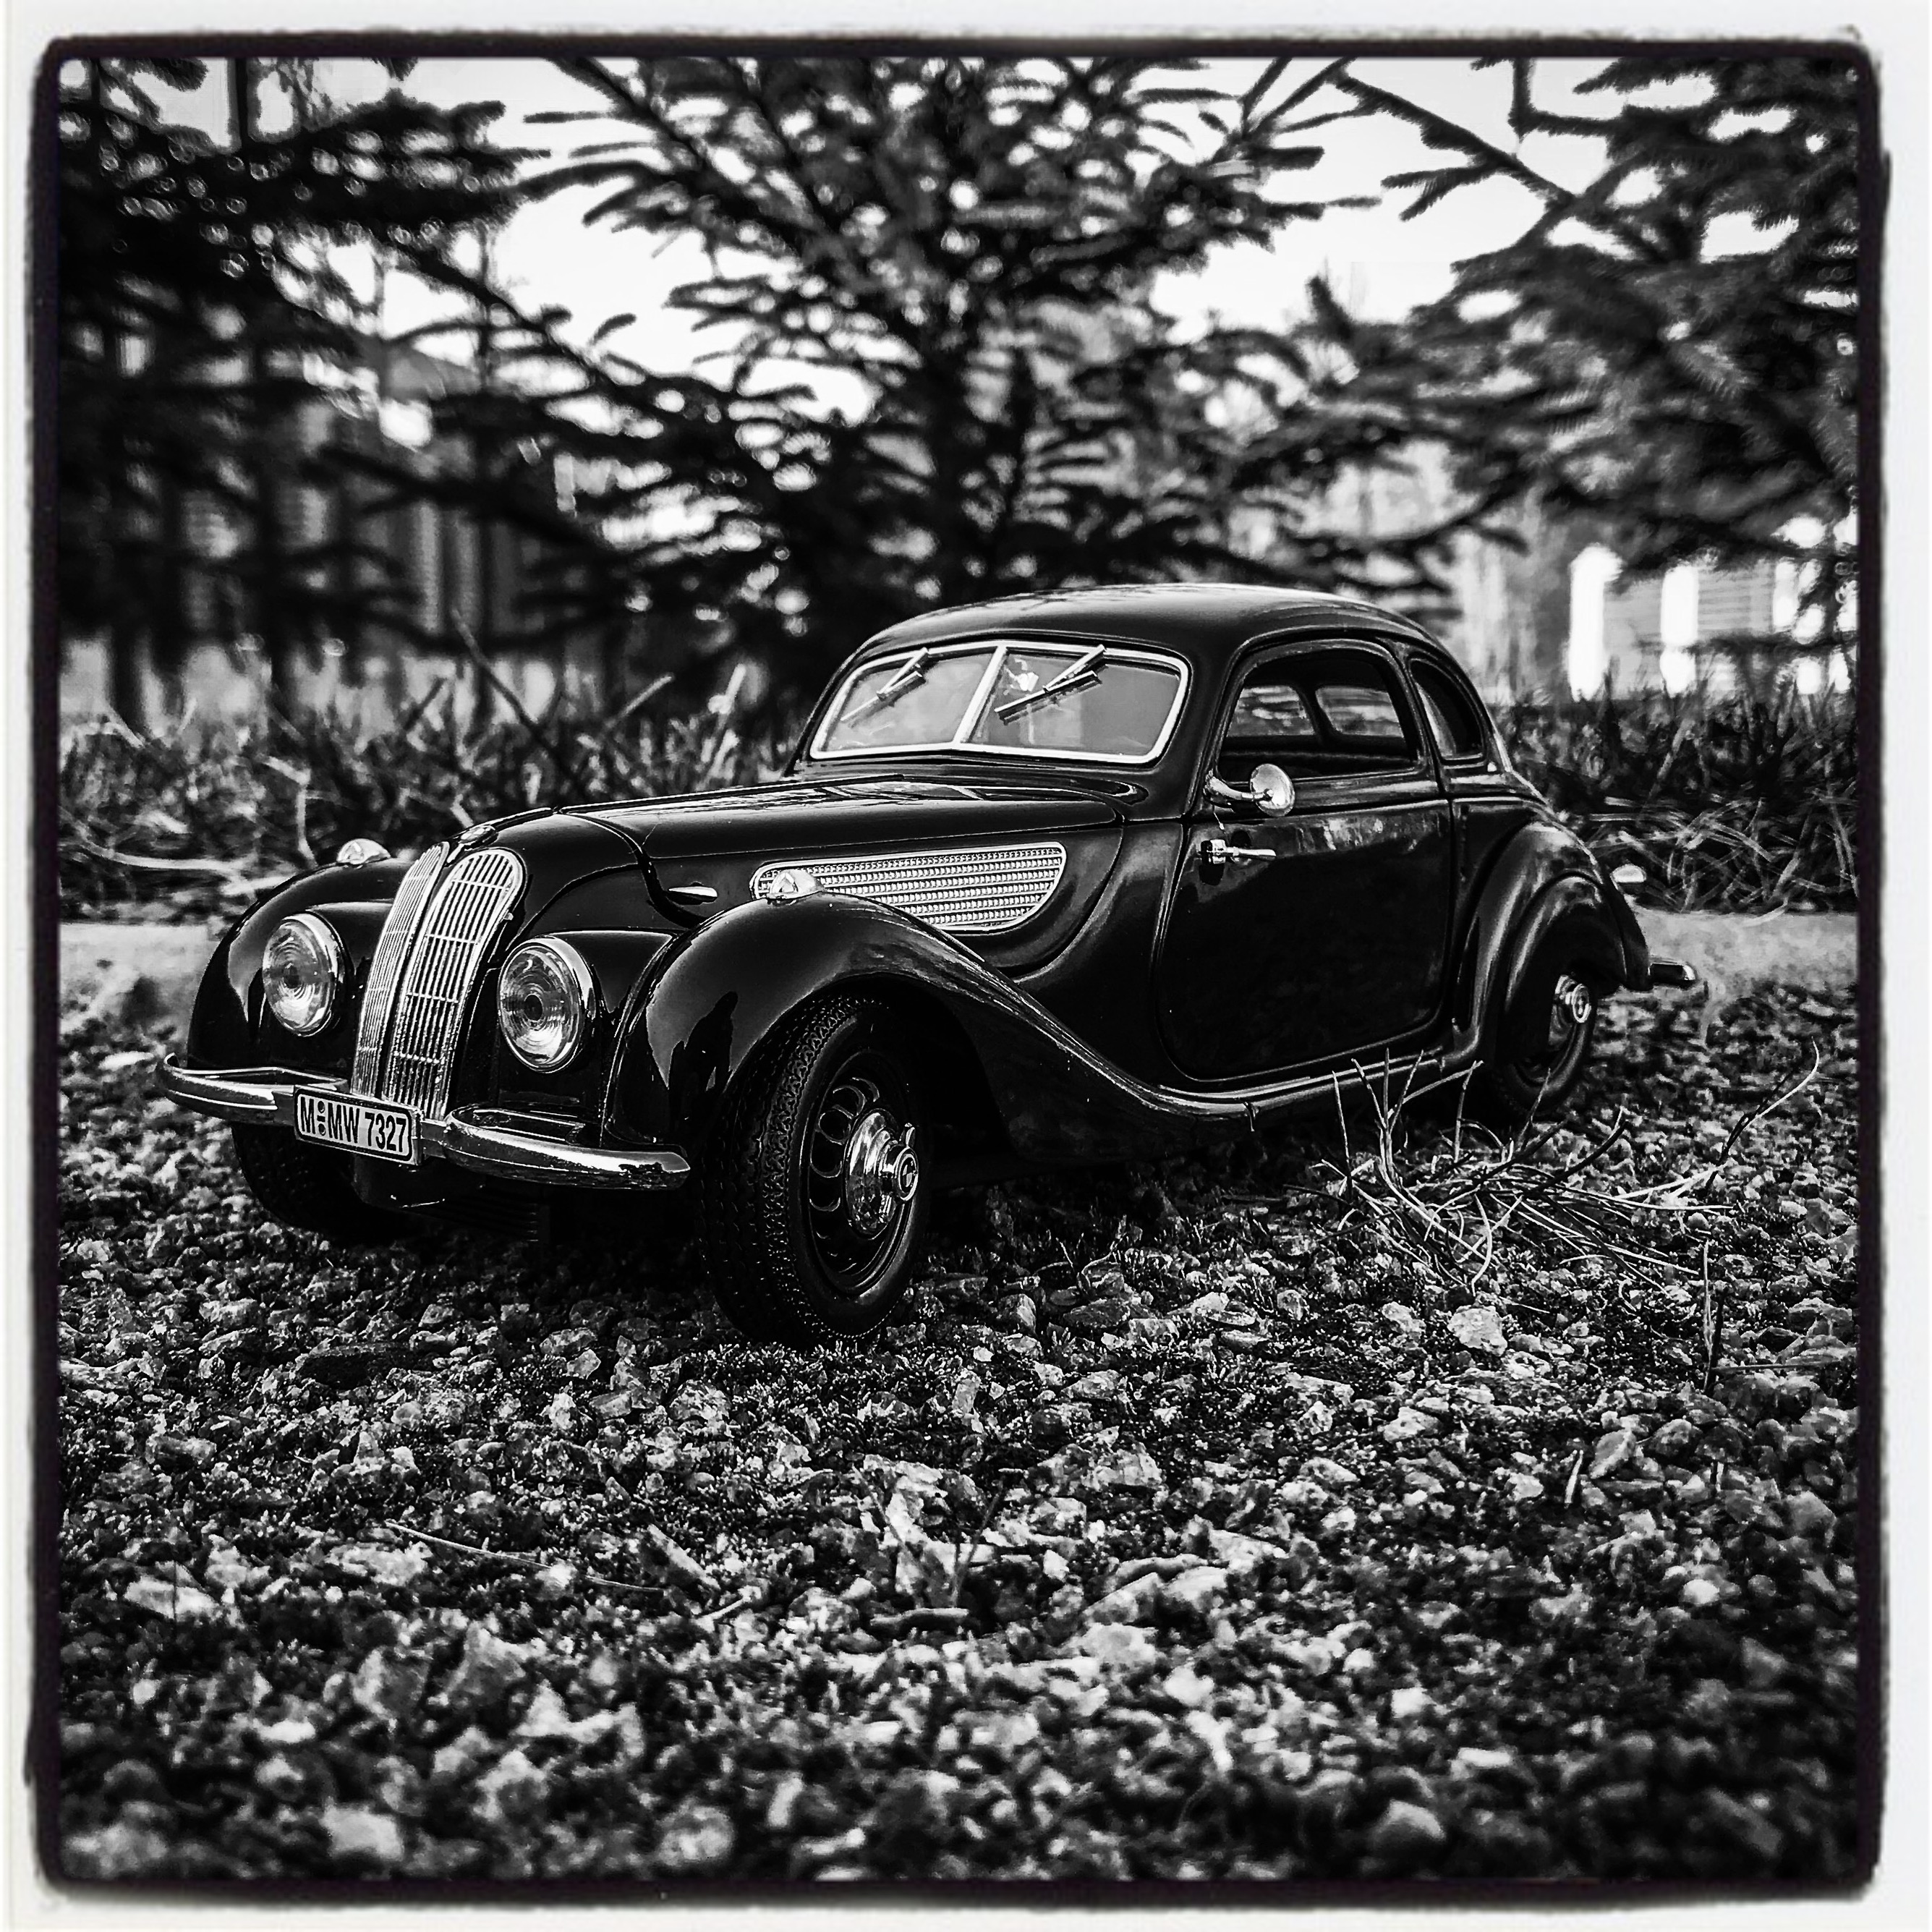 BMW 327 Coupe 1937 (guiloy)